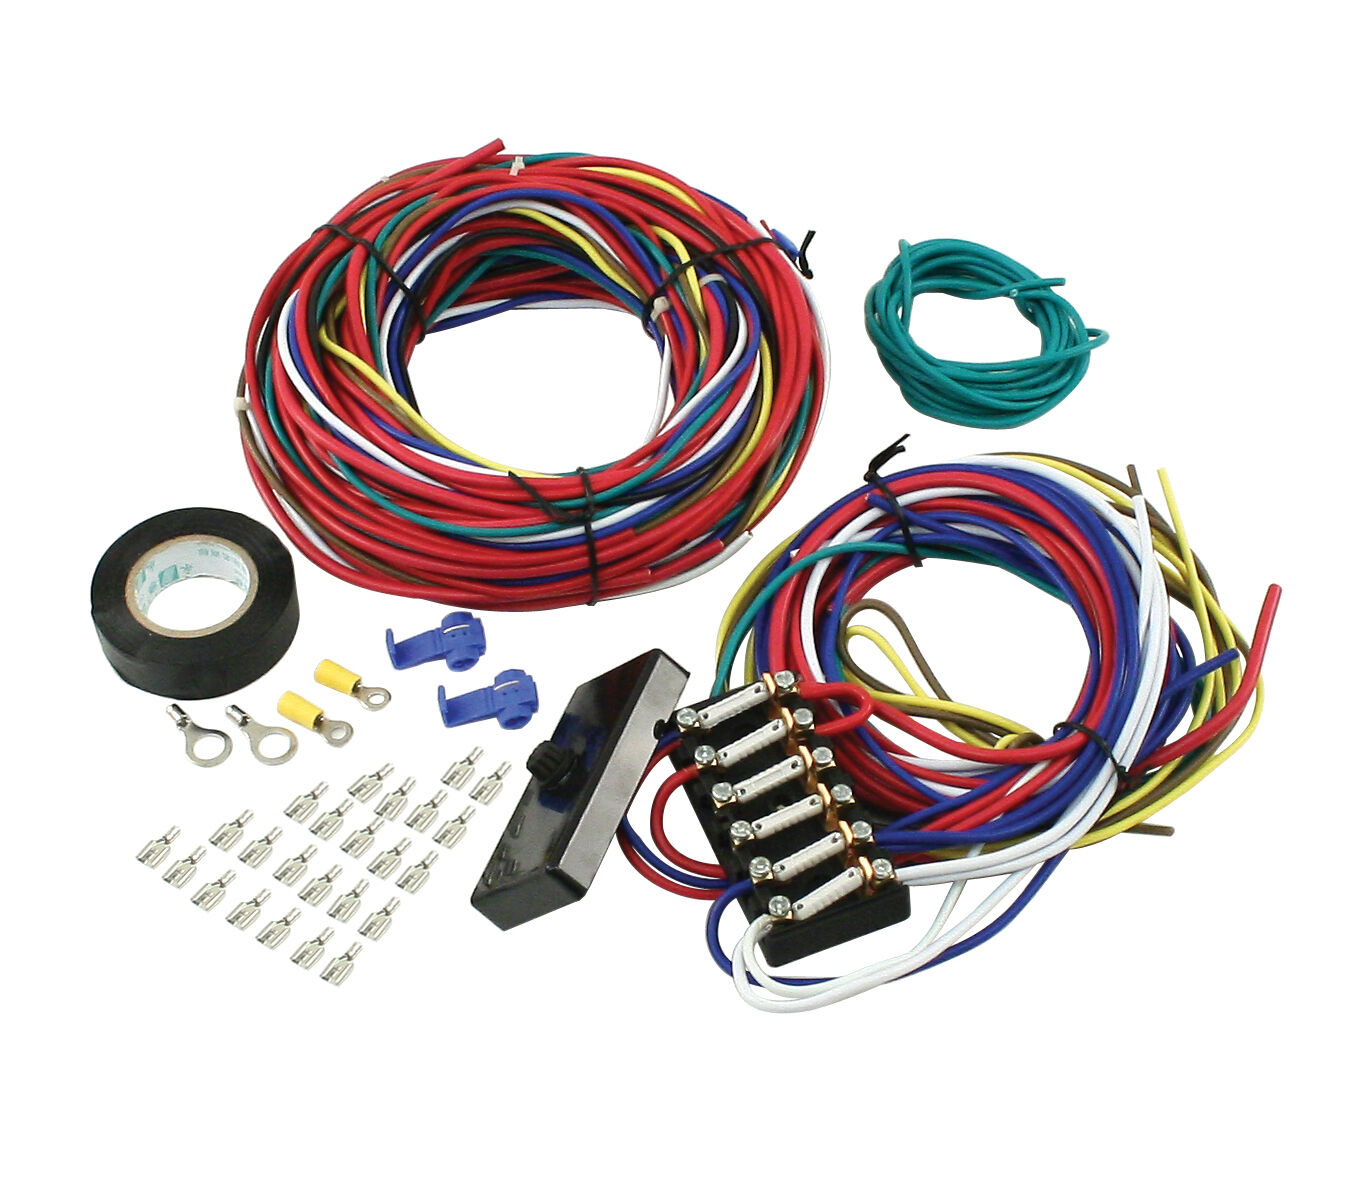 EMPI 9466 VW DUNE BUGGY UNIVERSAL WIRING HARNESS W/ FUSE BOX - R